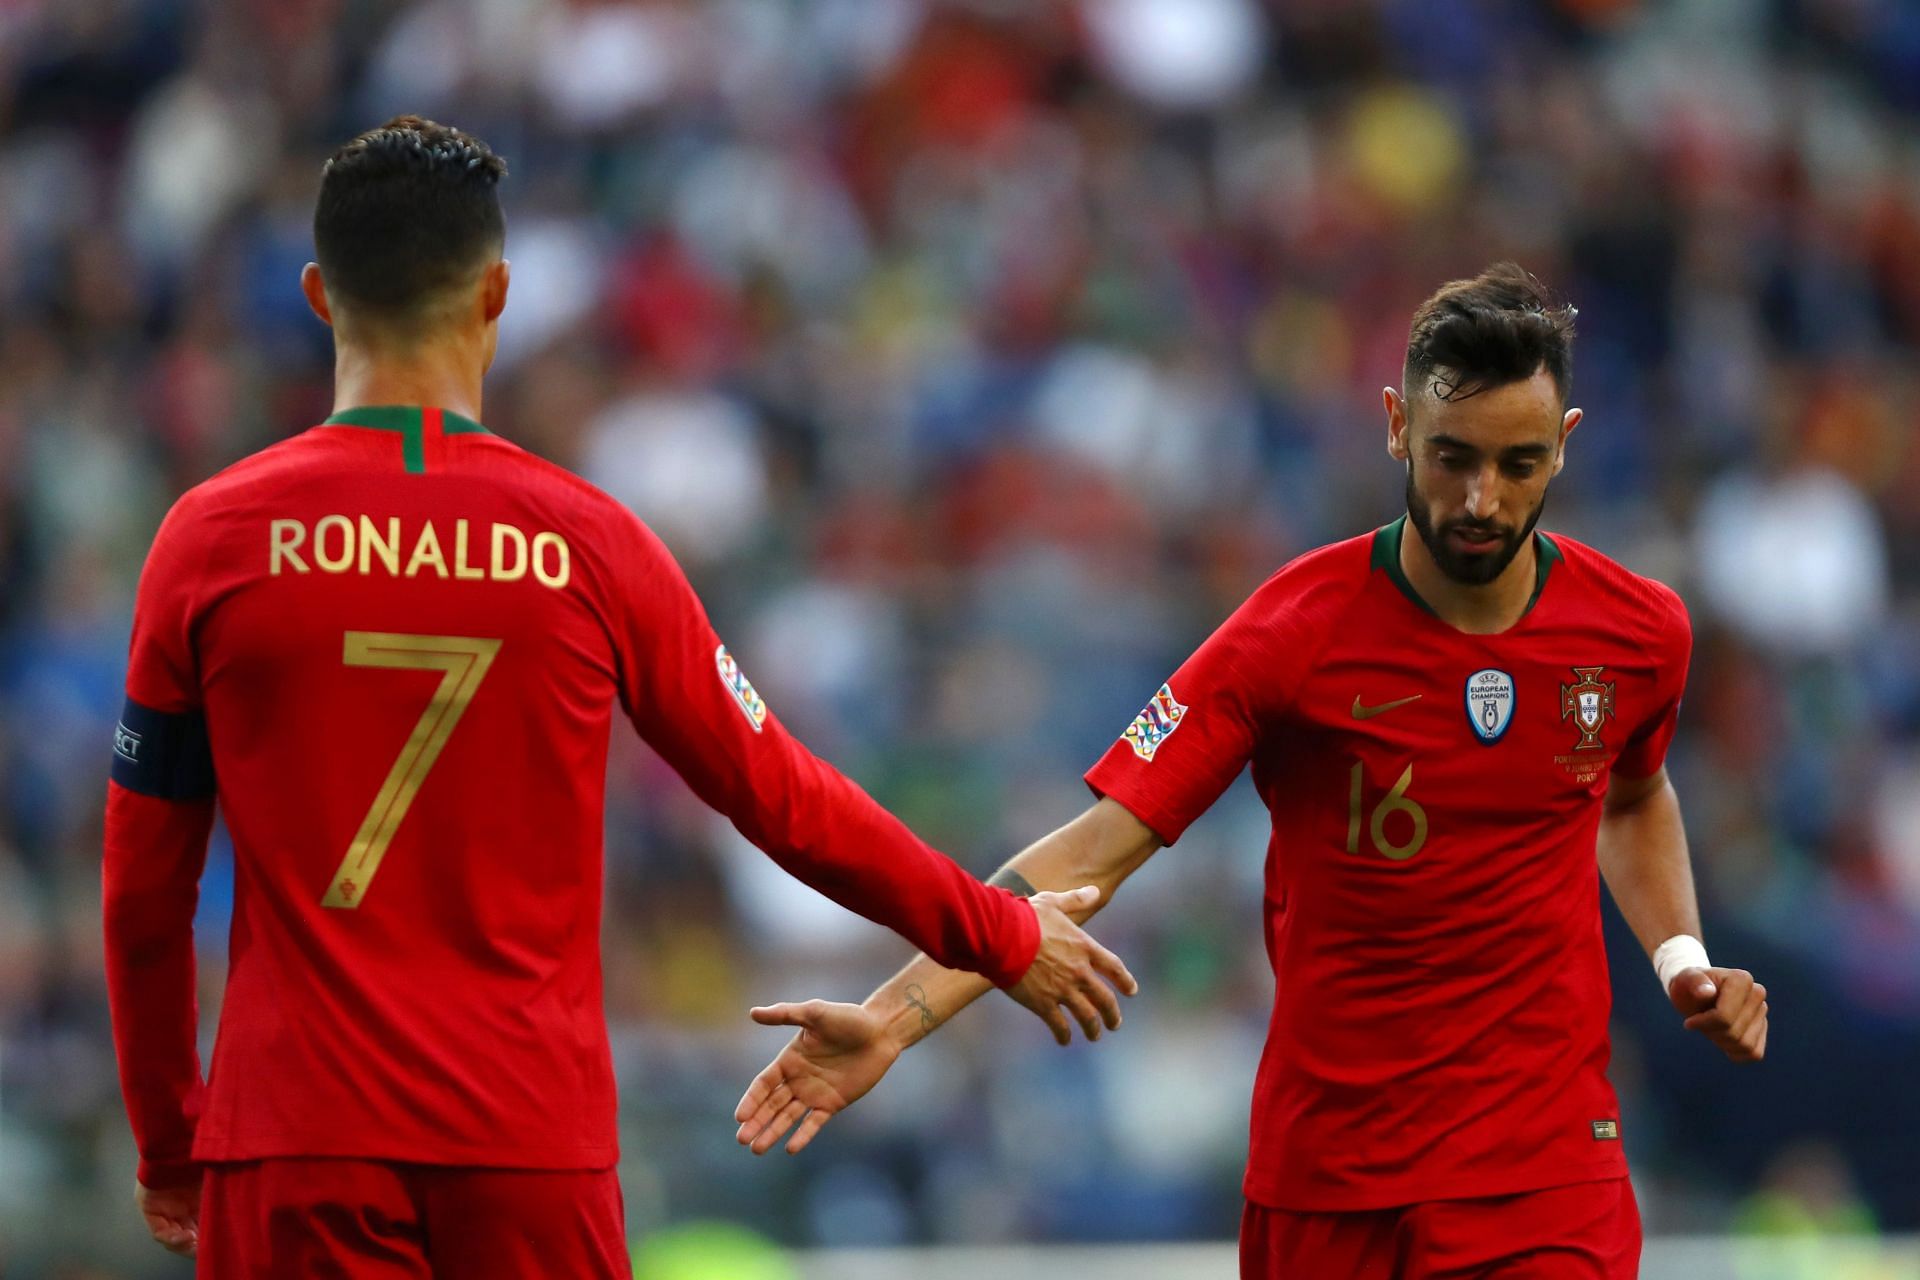 Cristiano Ronaldo (#7) and Bruno Fernandes in action for Portugal